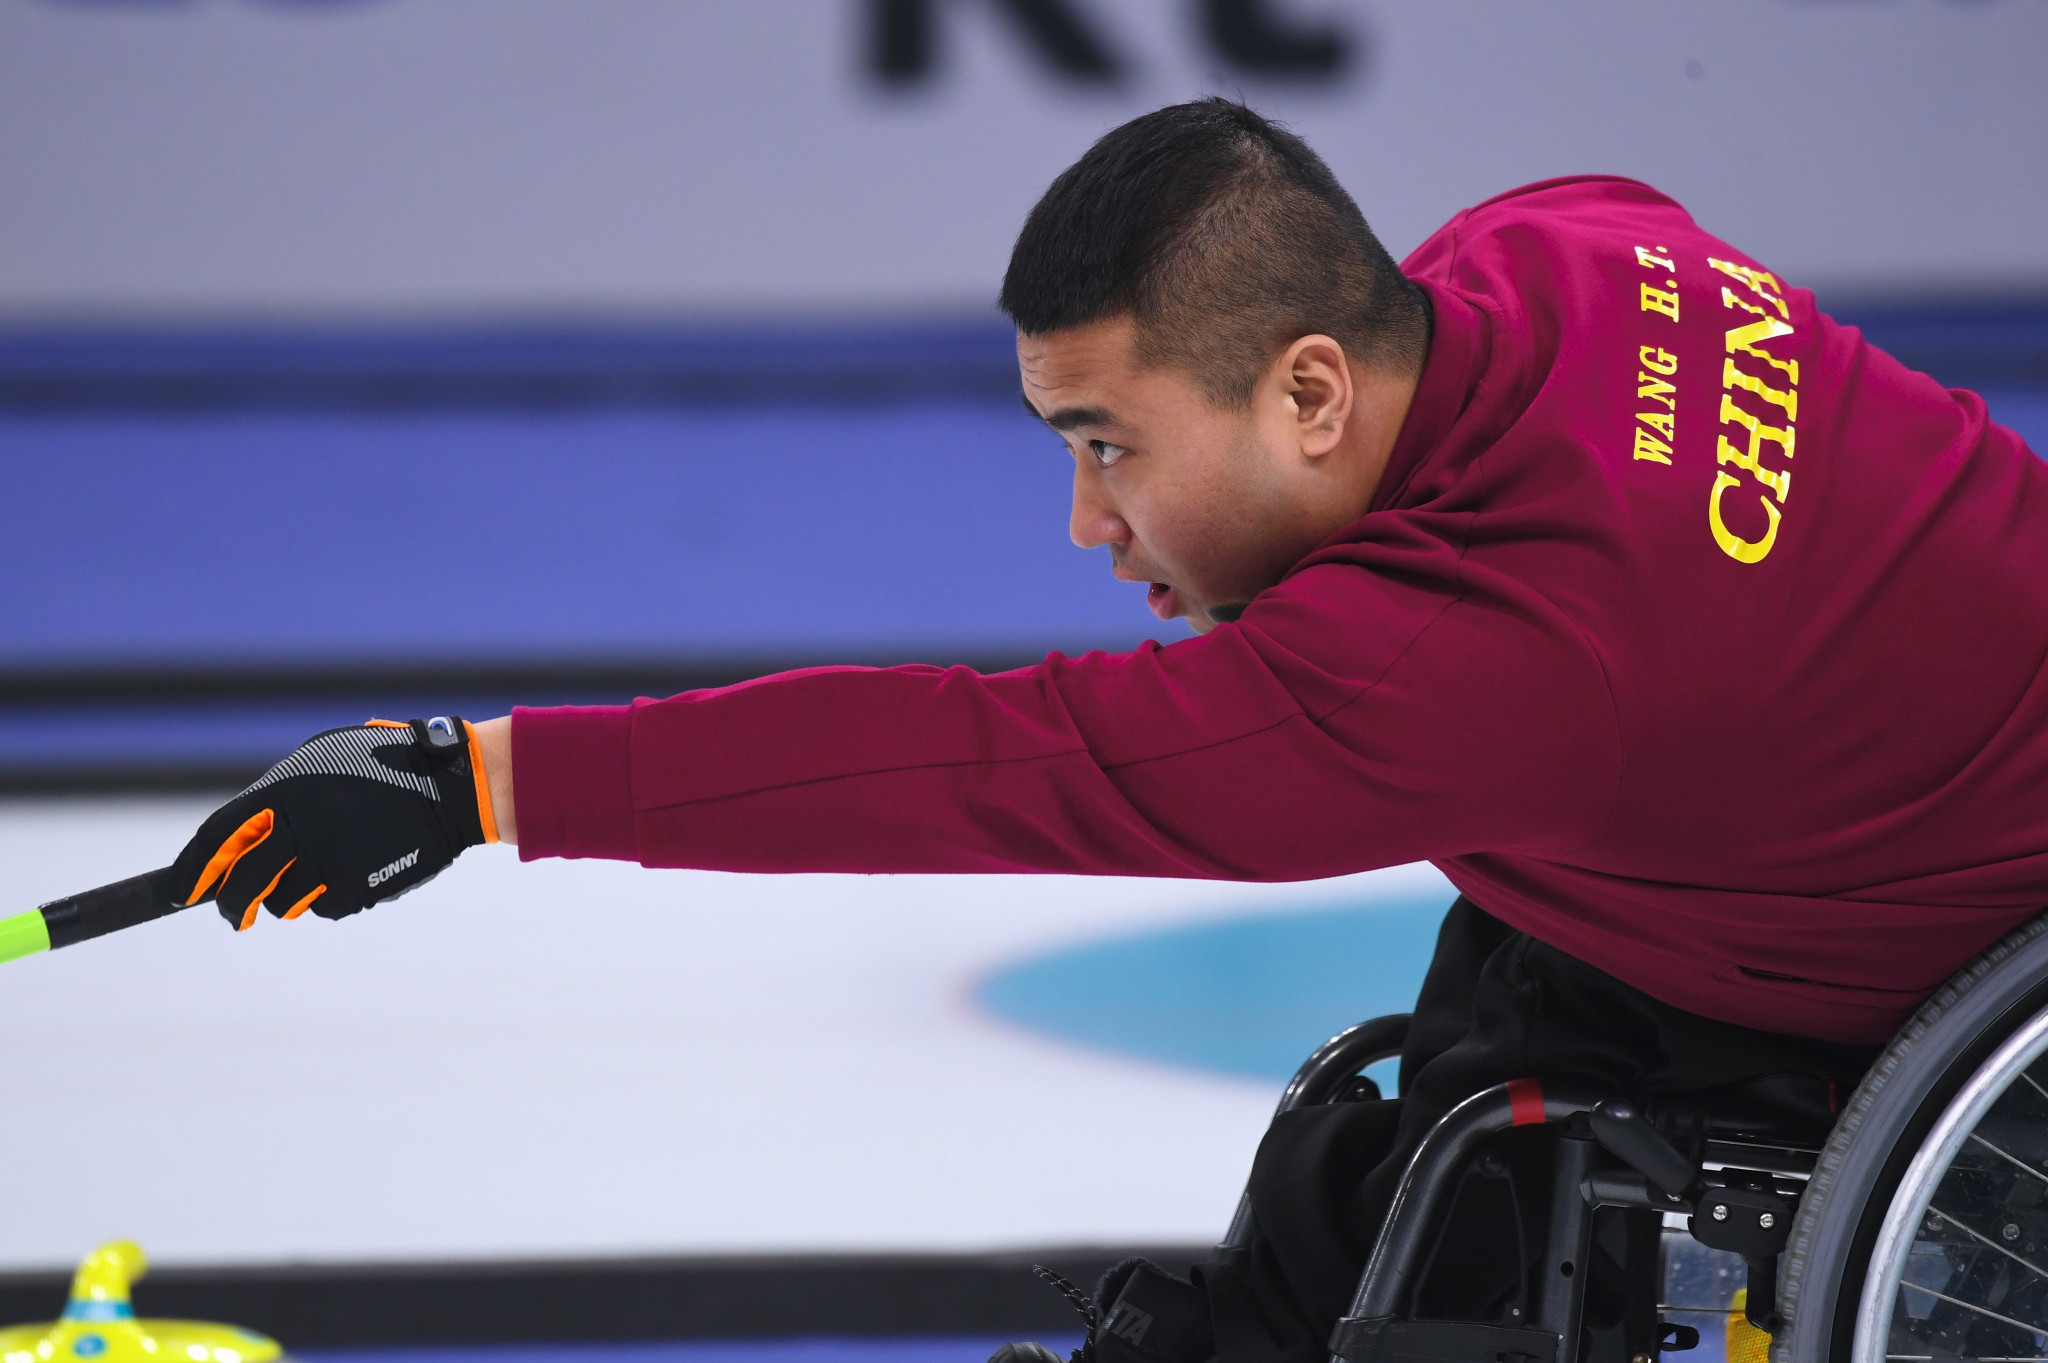 Wheelchair curling has been a Paralympic sport since 2006 ©Getty Images 